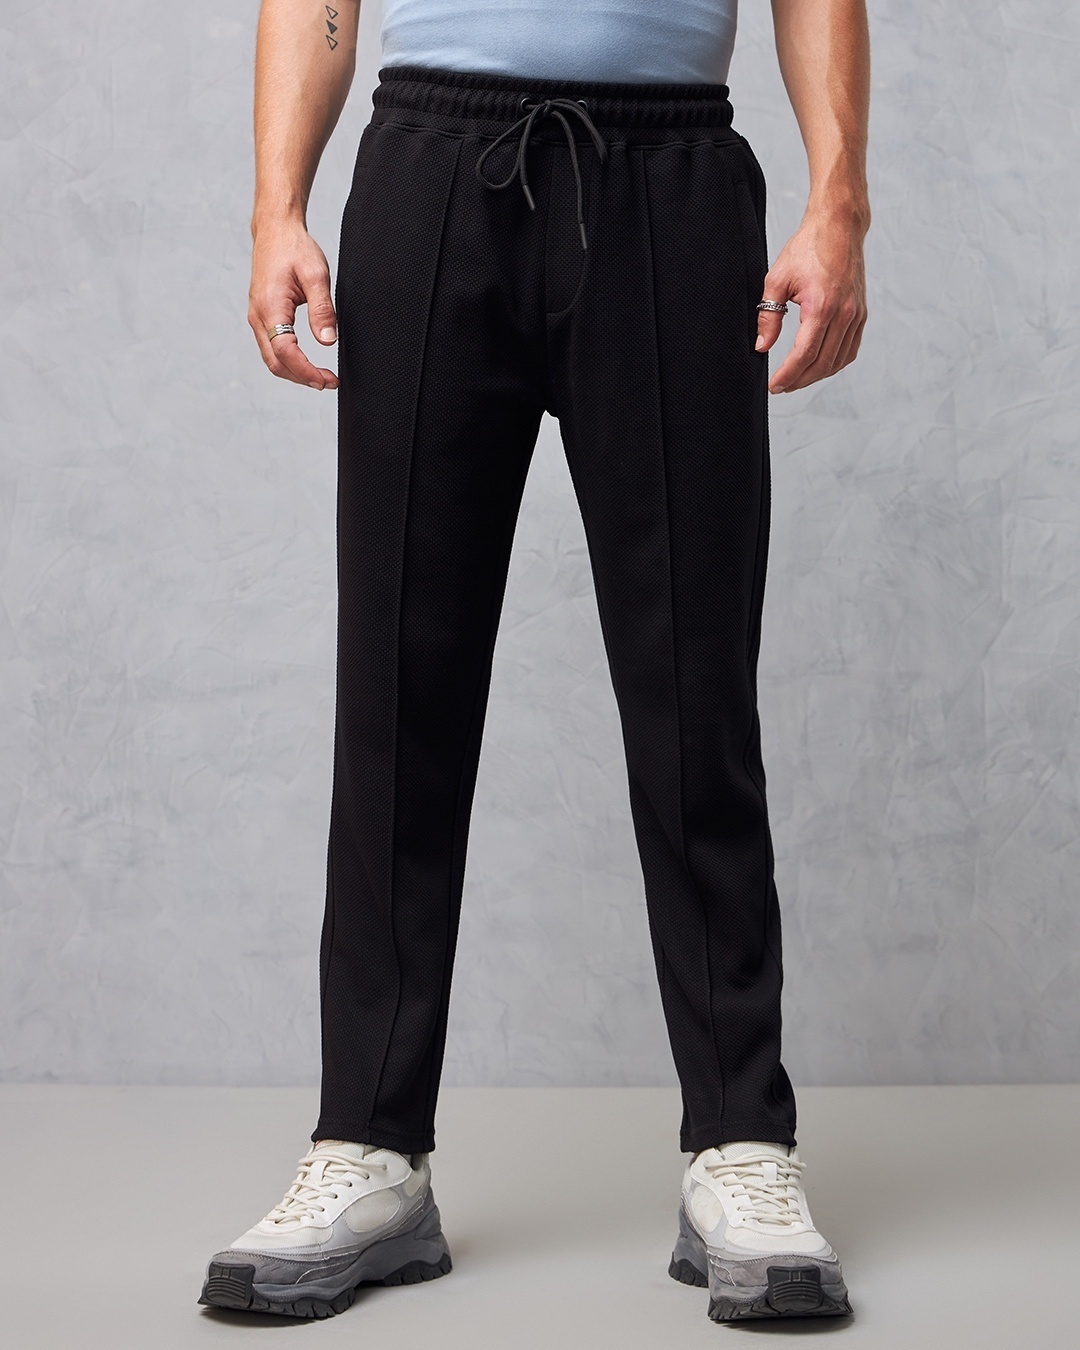 men wearing black straight fit types of joggers